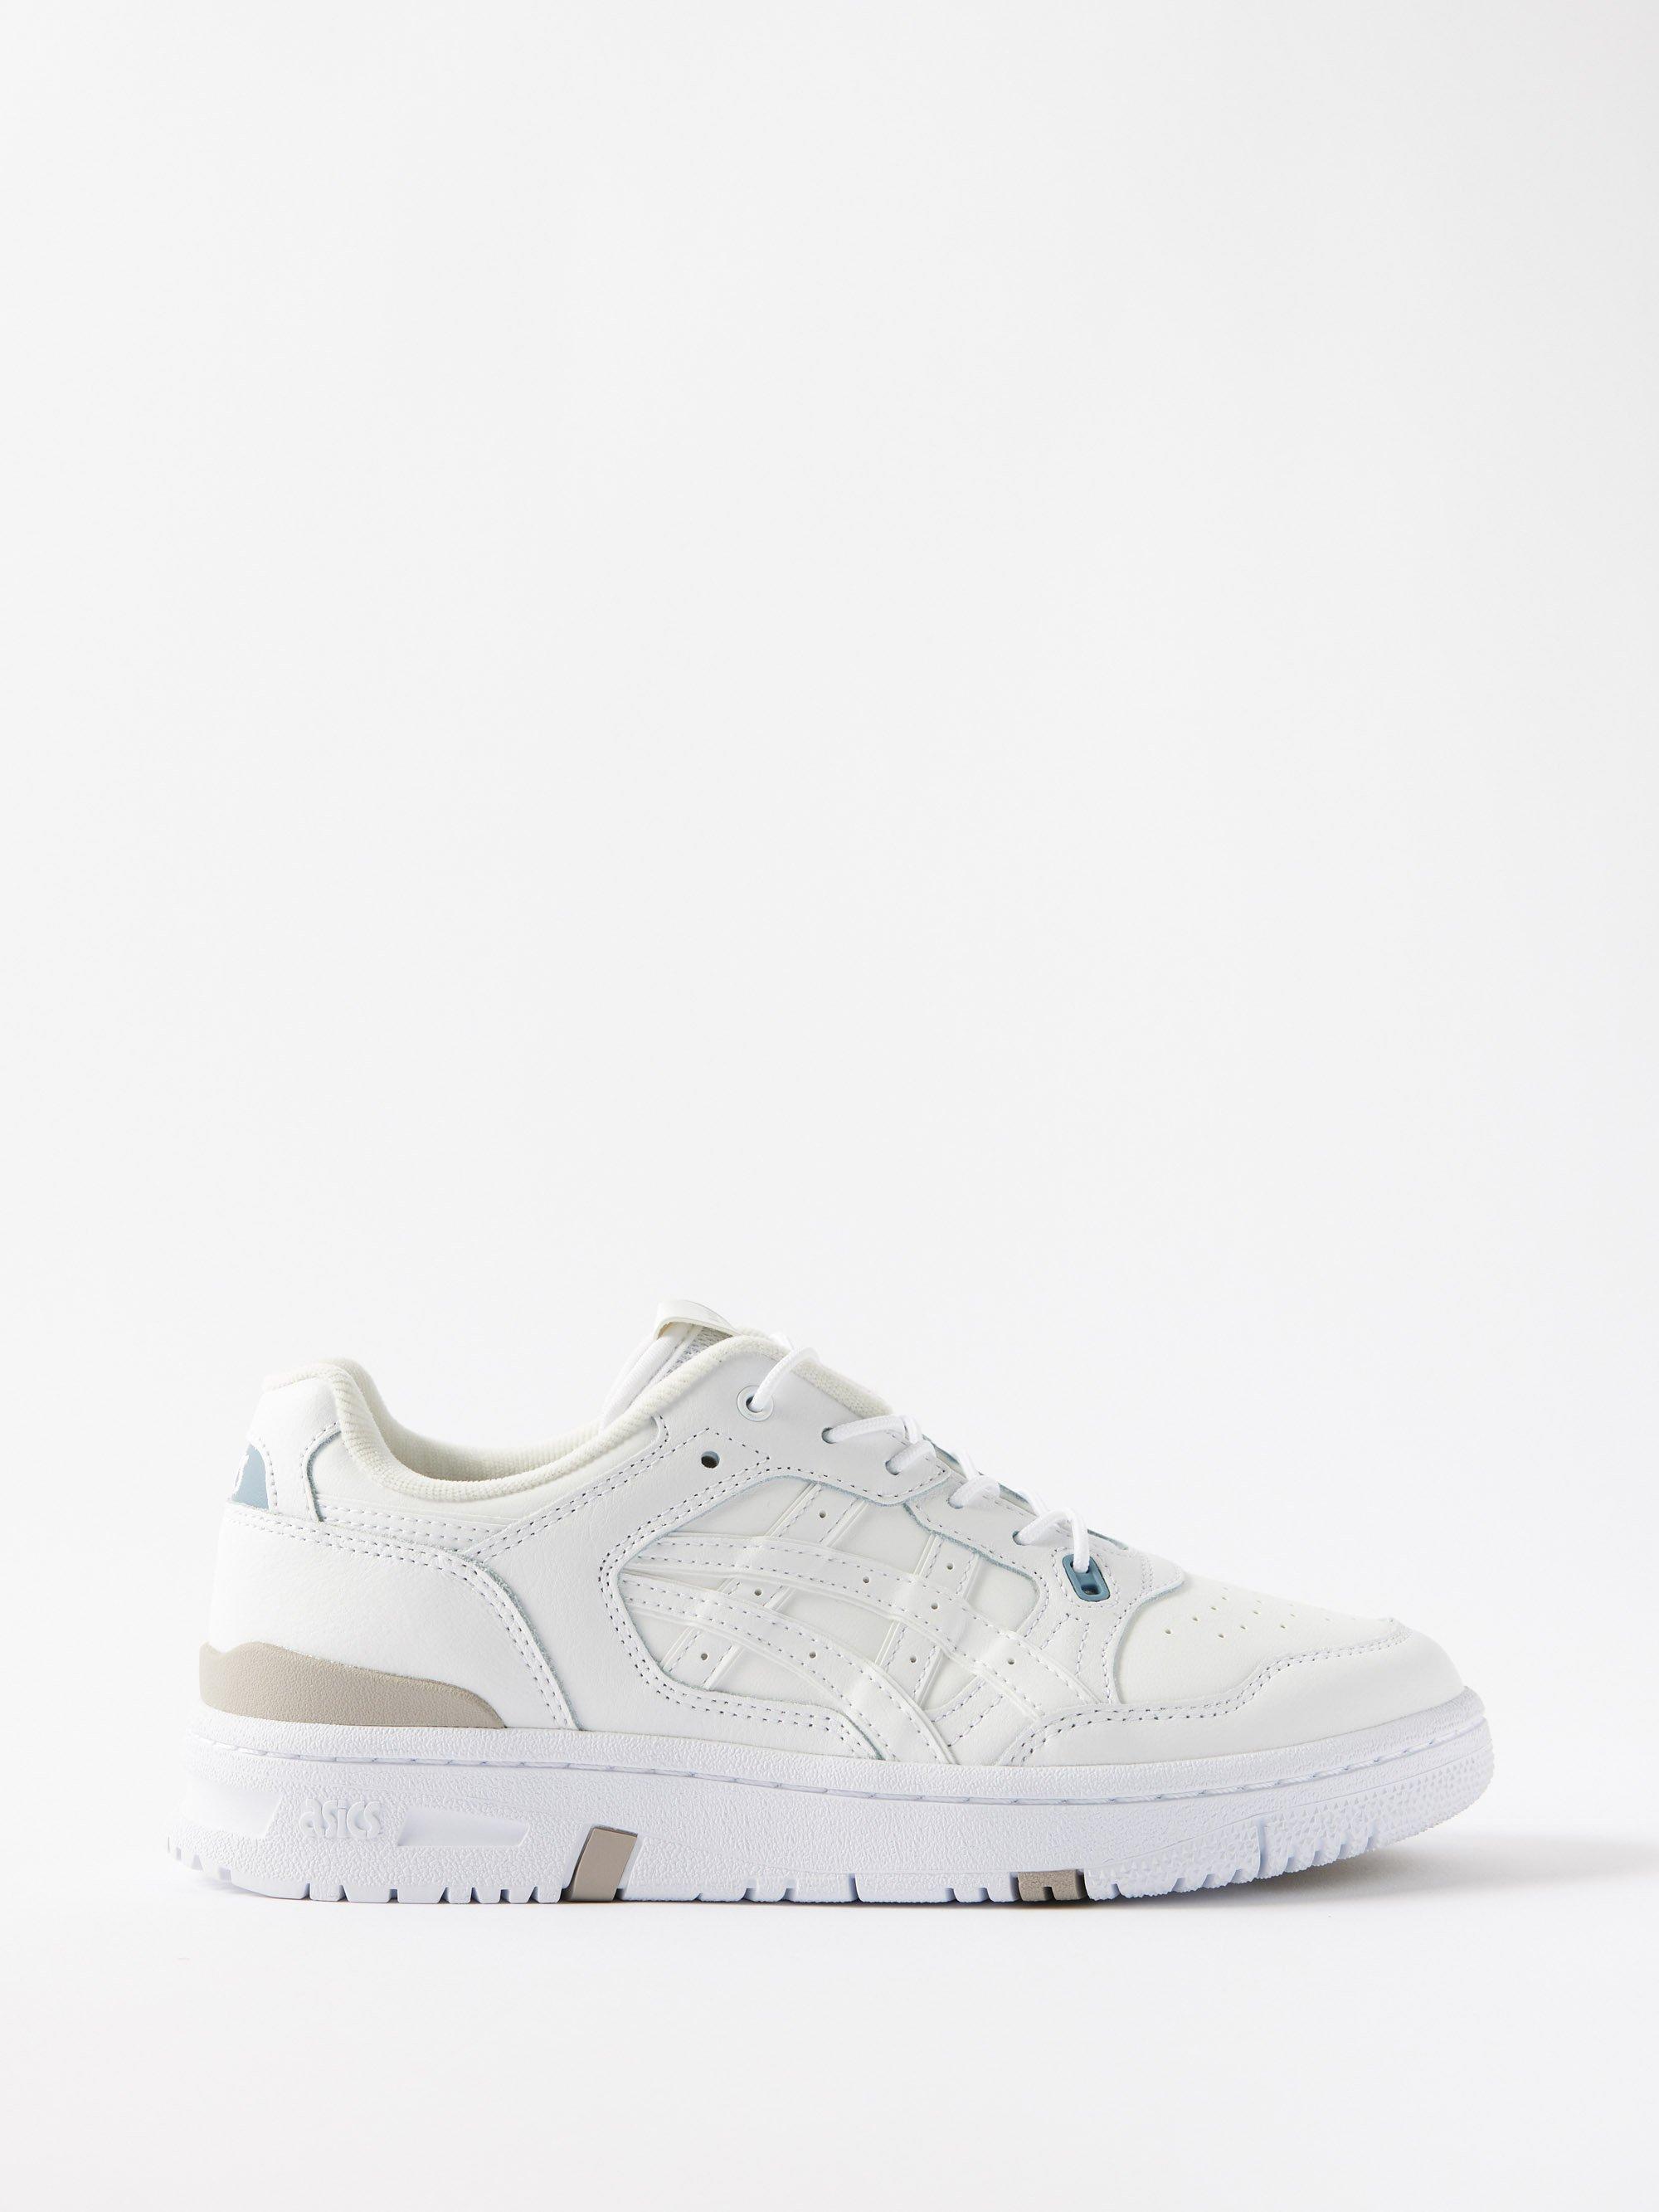 Asics Charlotte Cardin X Ex89 Leather Trainers in White | Lyst